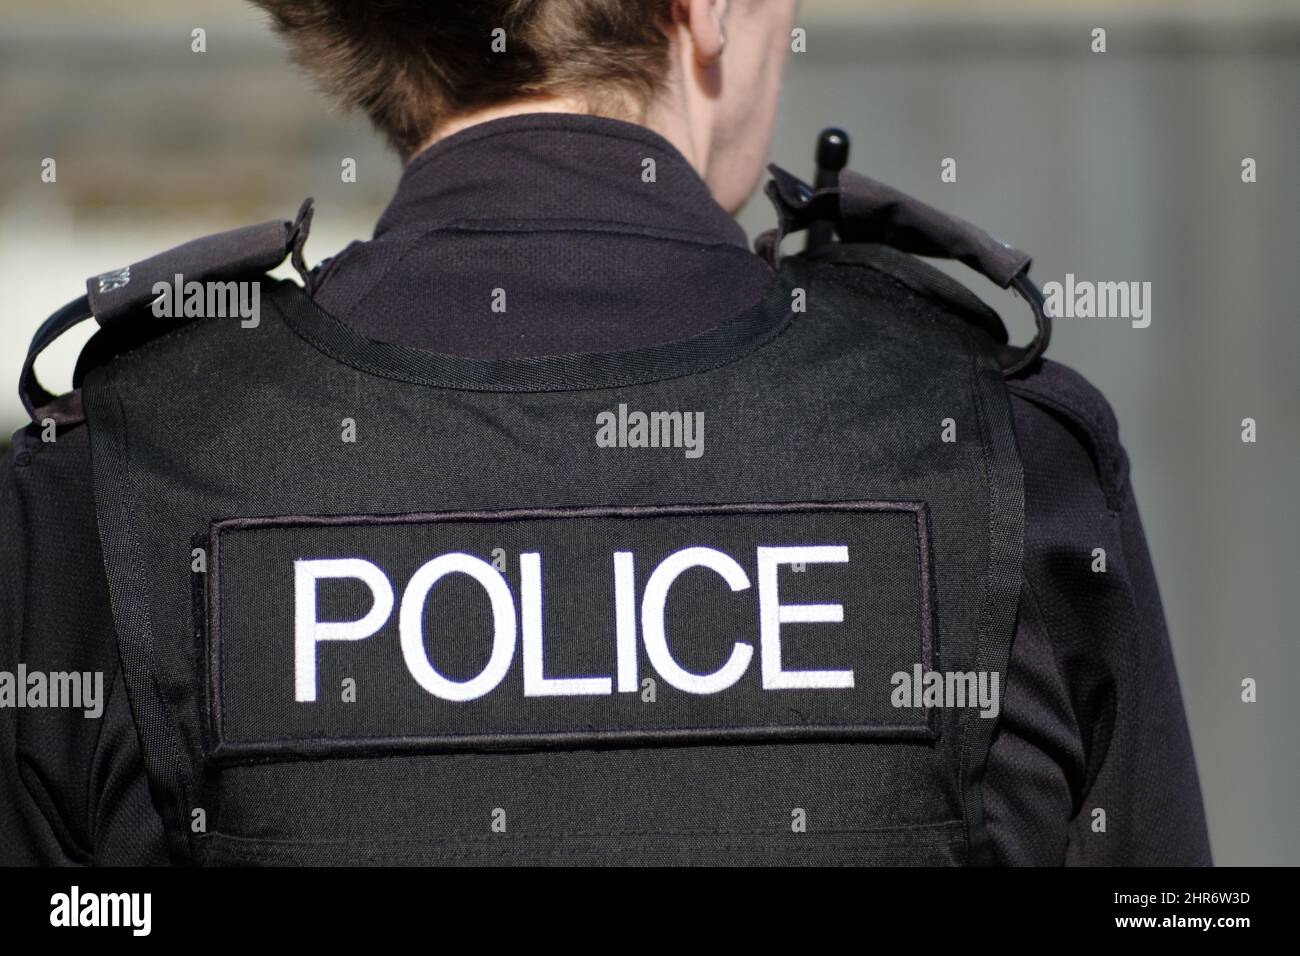 A rear view of a British female police officer in full uniform and wearing body armour. The image clearly shows the officers police insignia Stock Photo